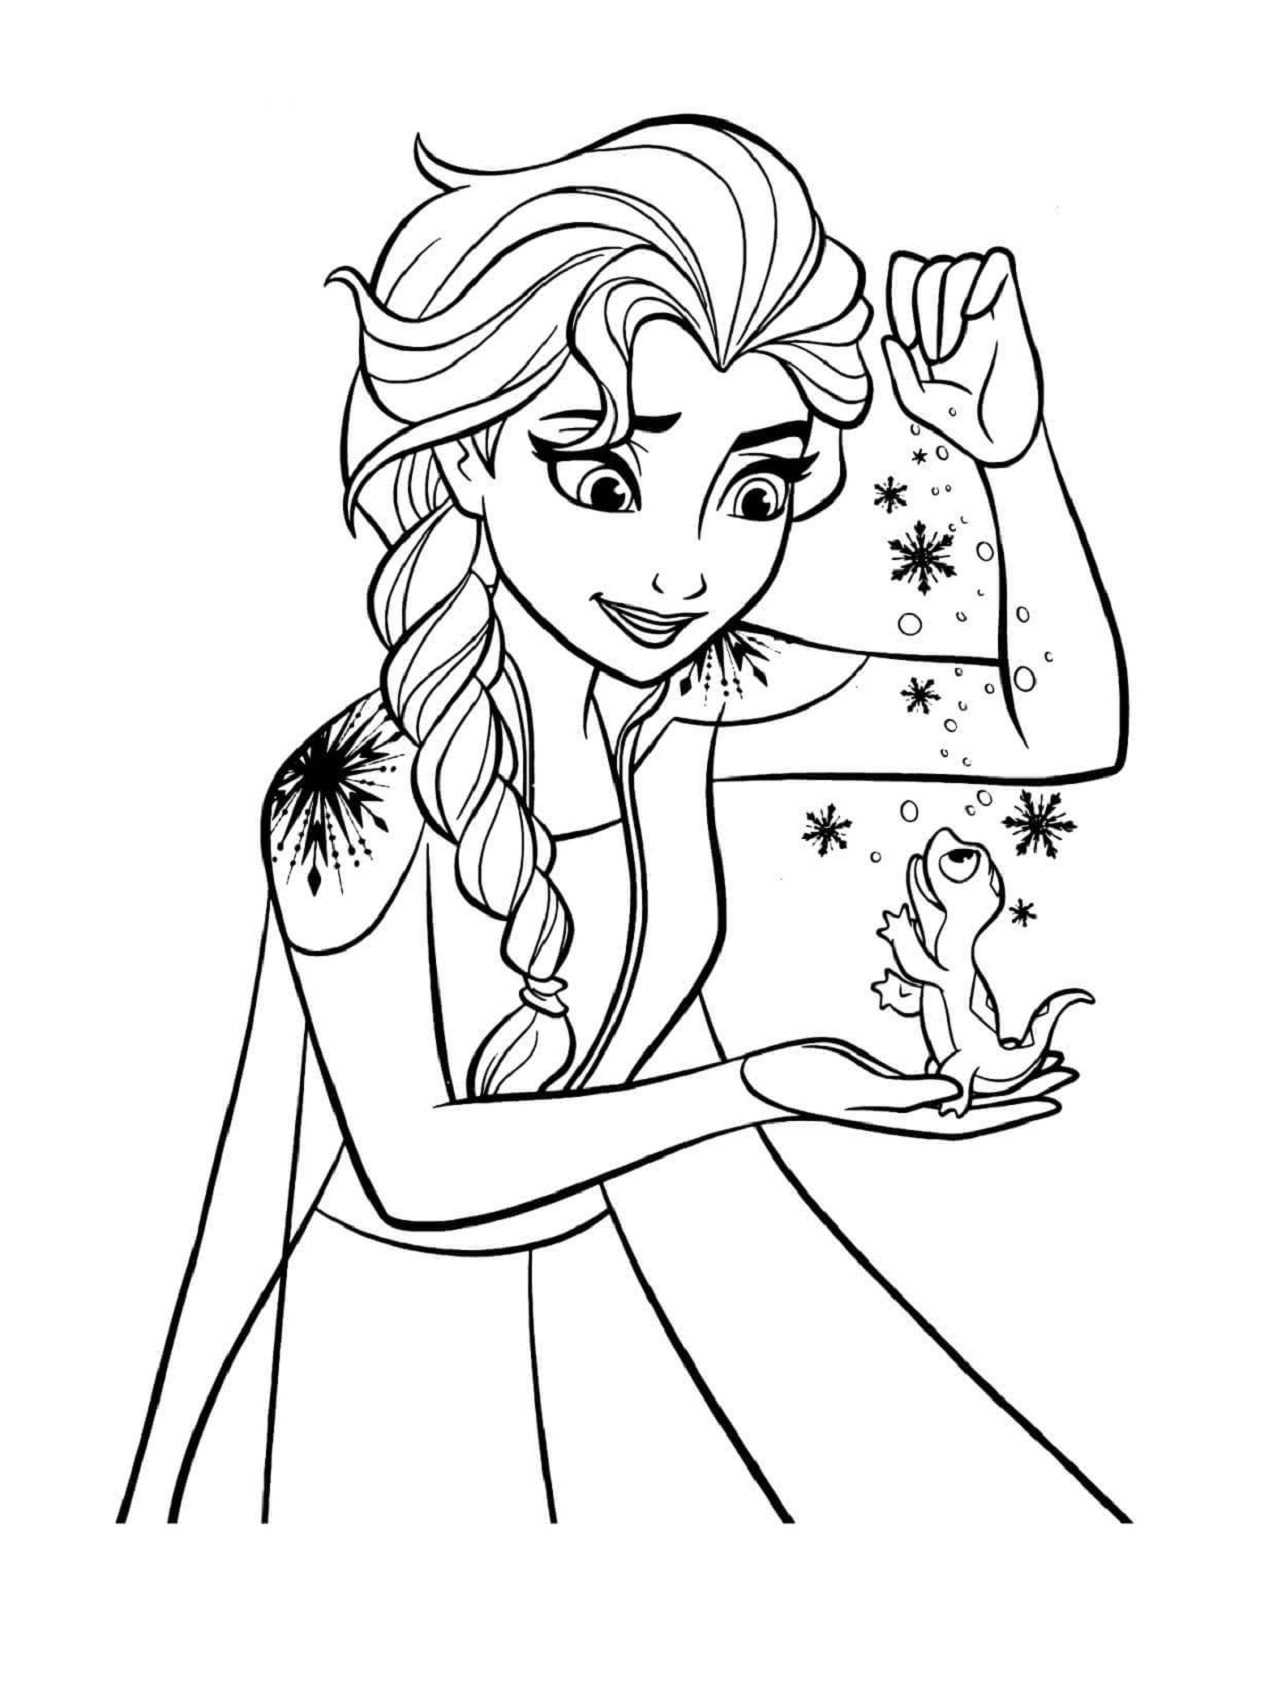 Printable Frozen and Frog Bruni Coloring Page for kids.